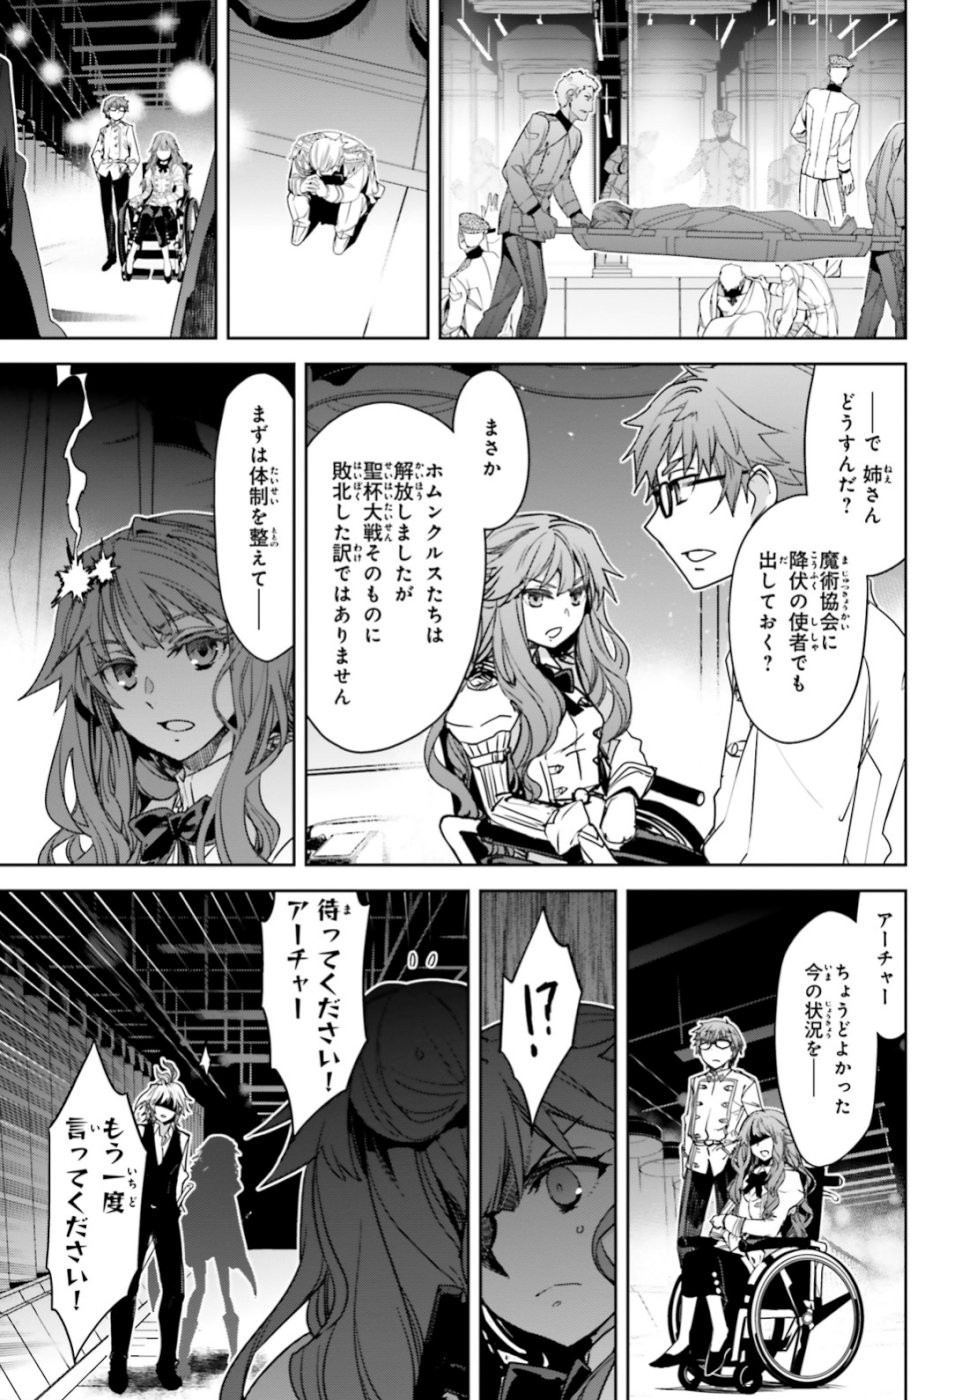 Fate-Apocrypha - Chapter 34 - Page 11